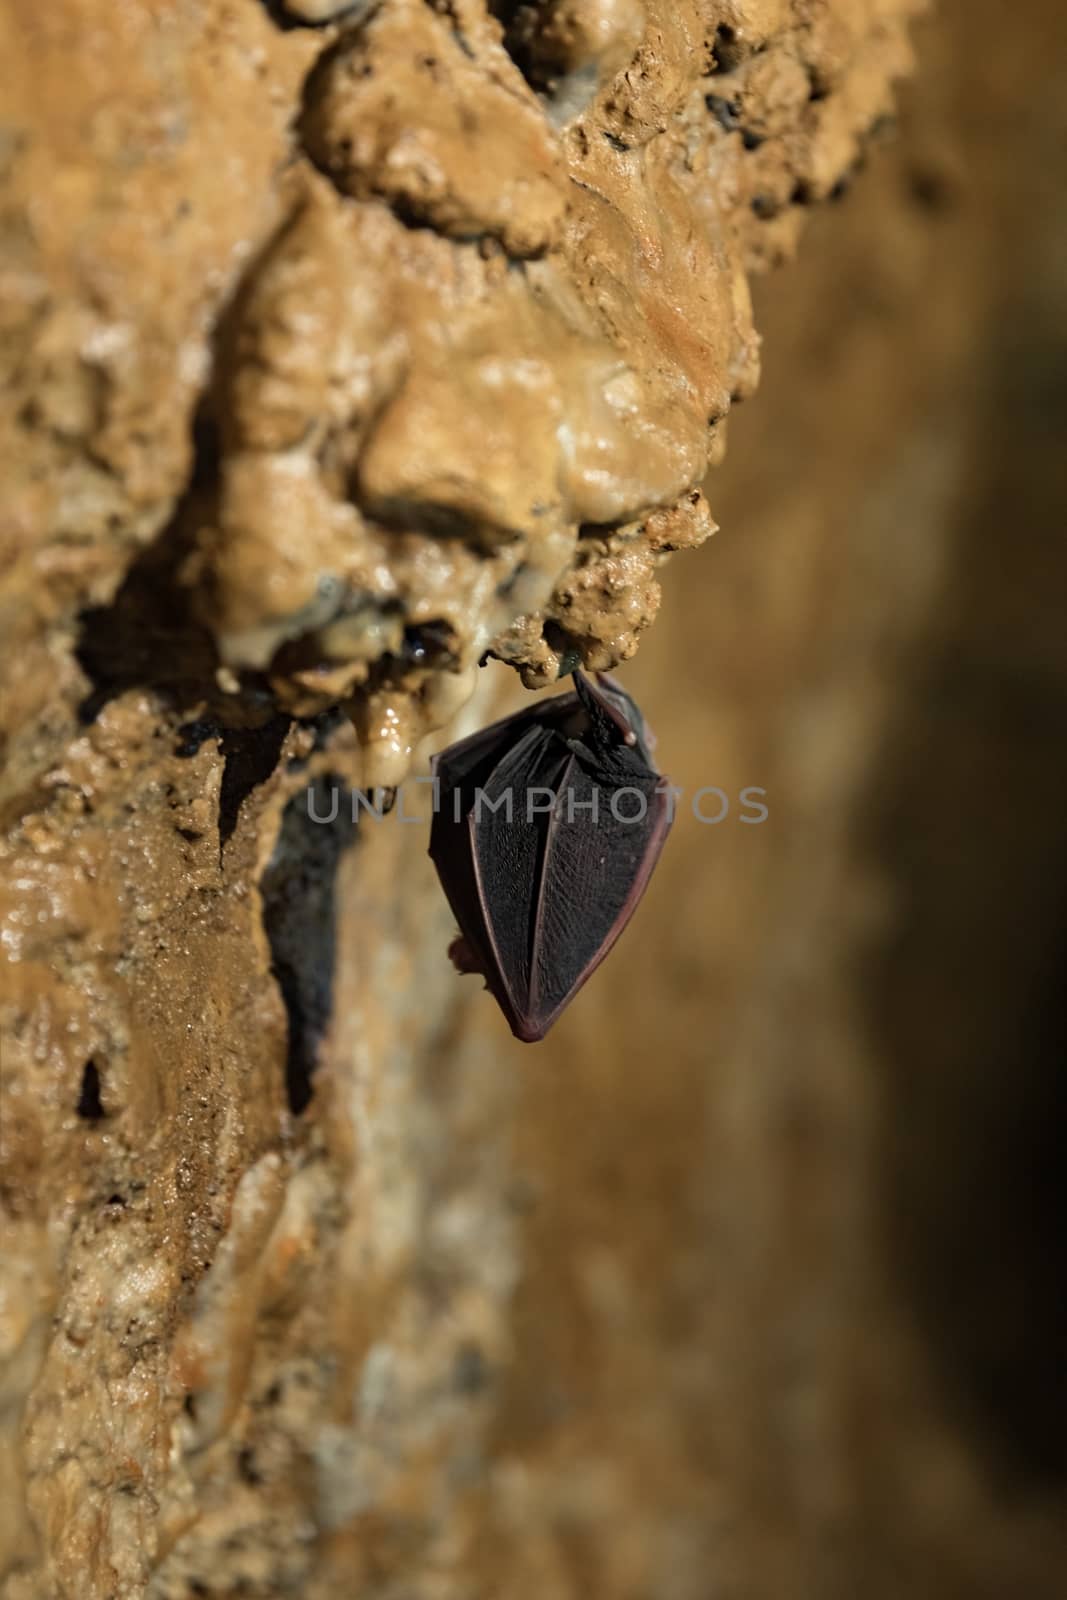 Bat sleeping in the cave by svedoliver